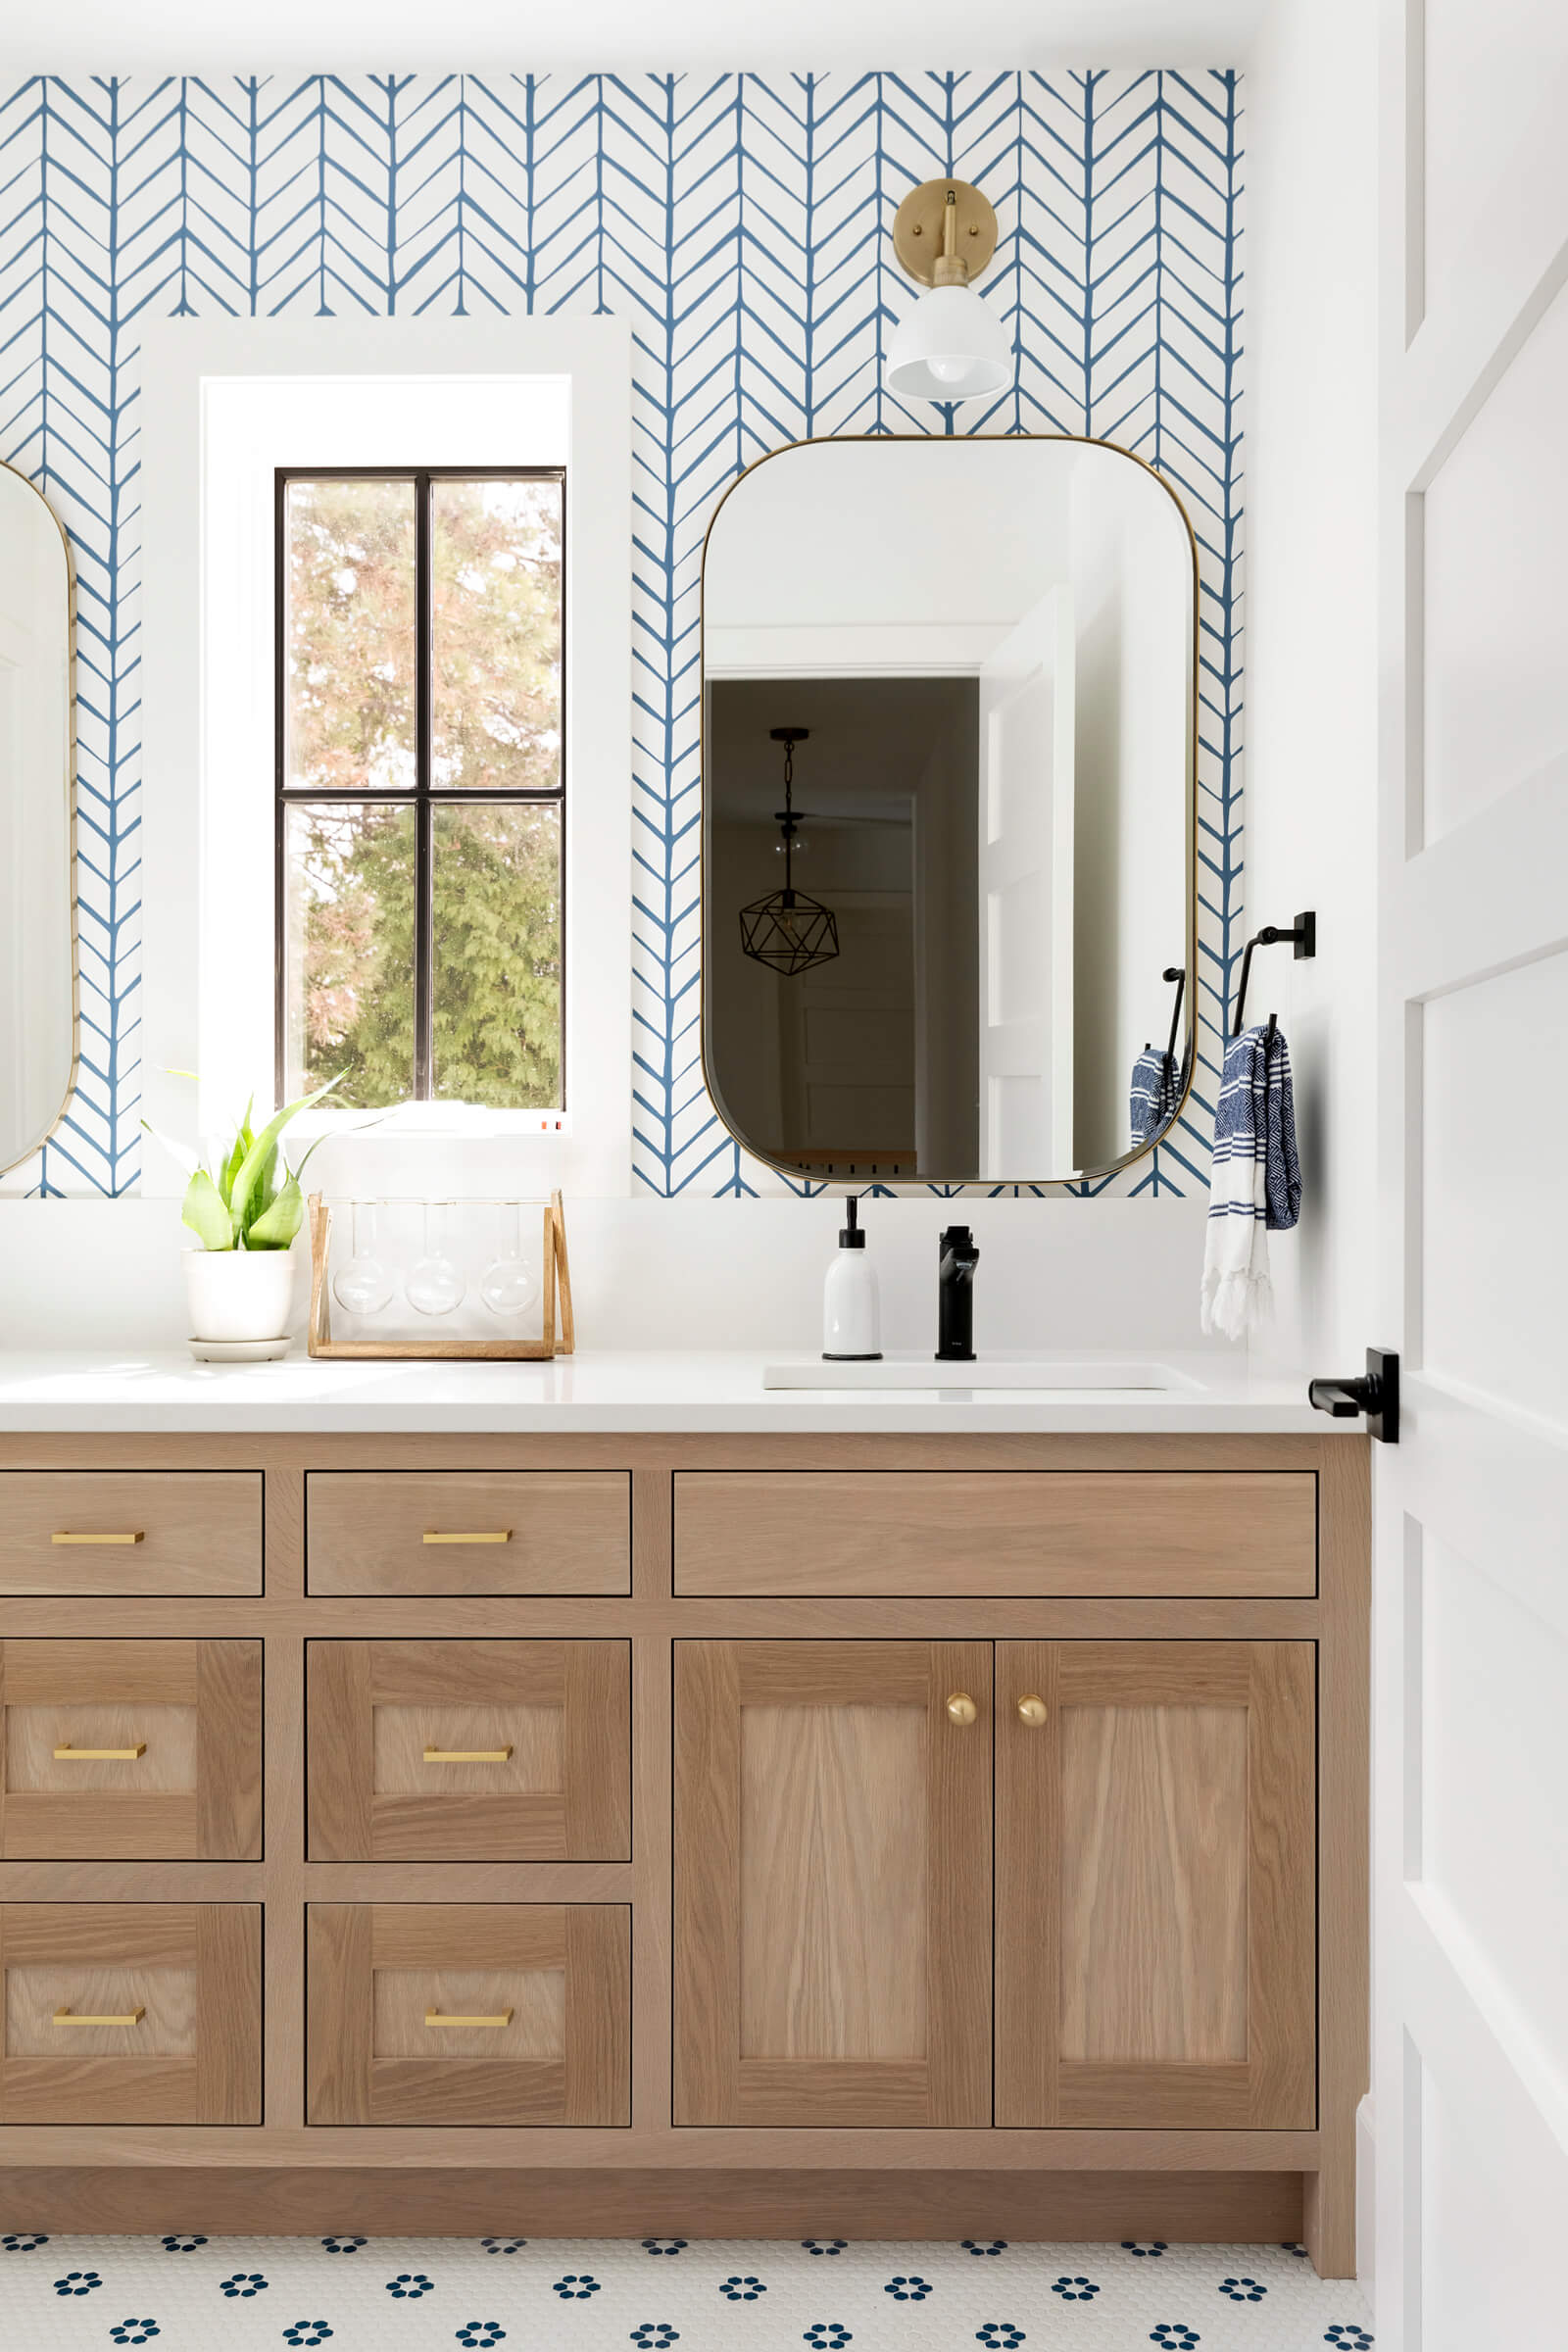 Guess bath with statement wallpaper, paired with natural white oak bathroom vanity.